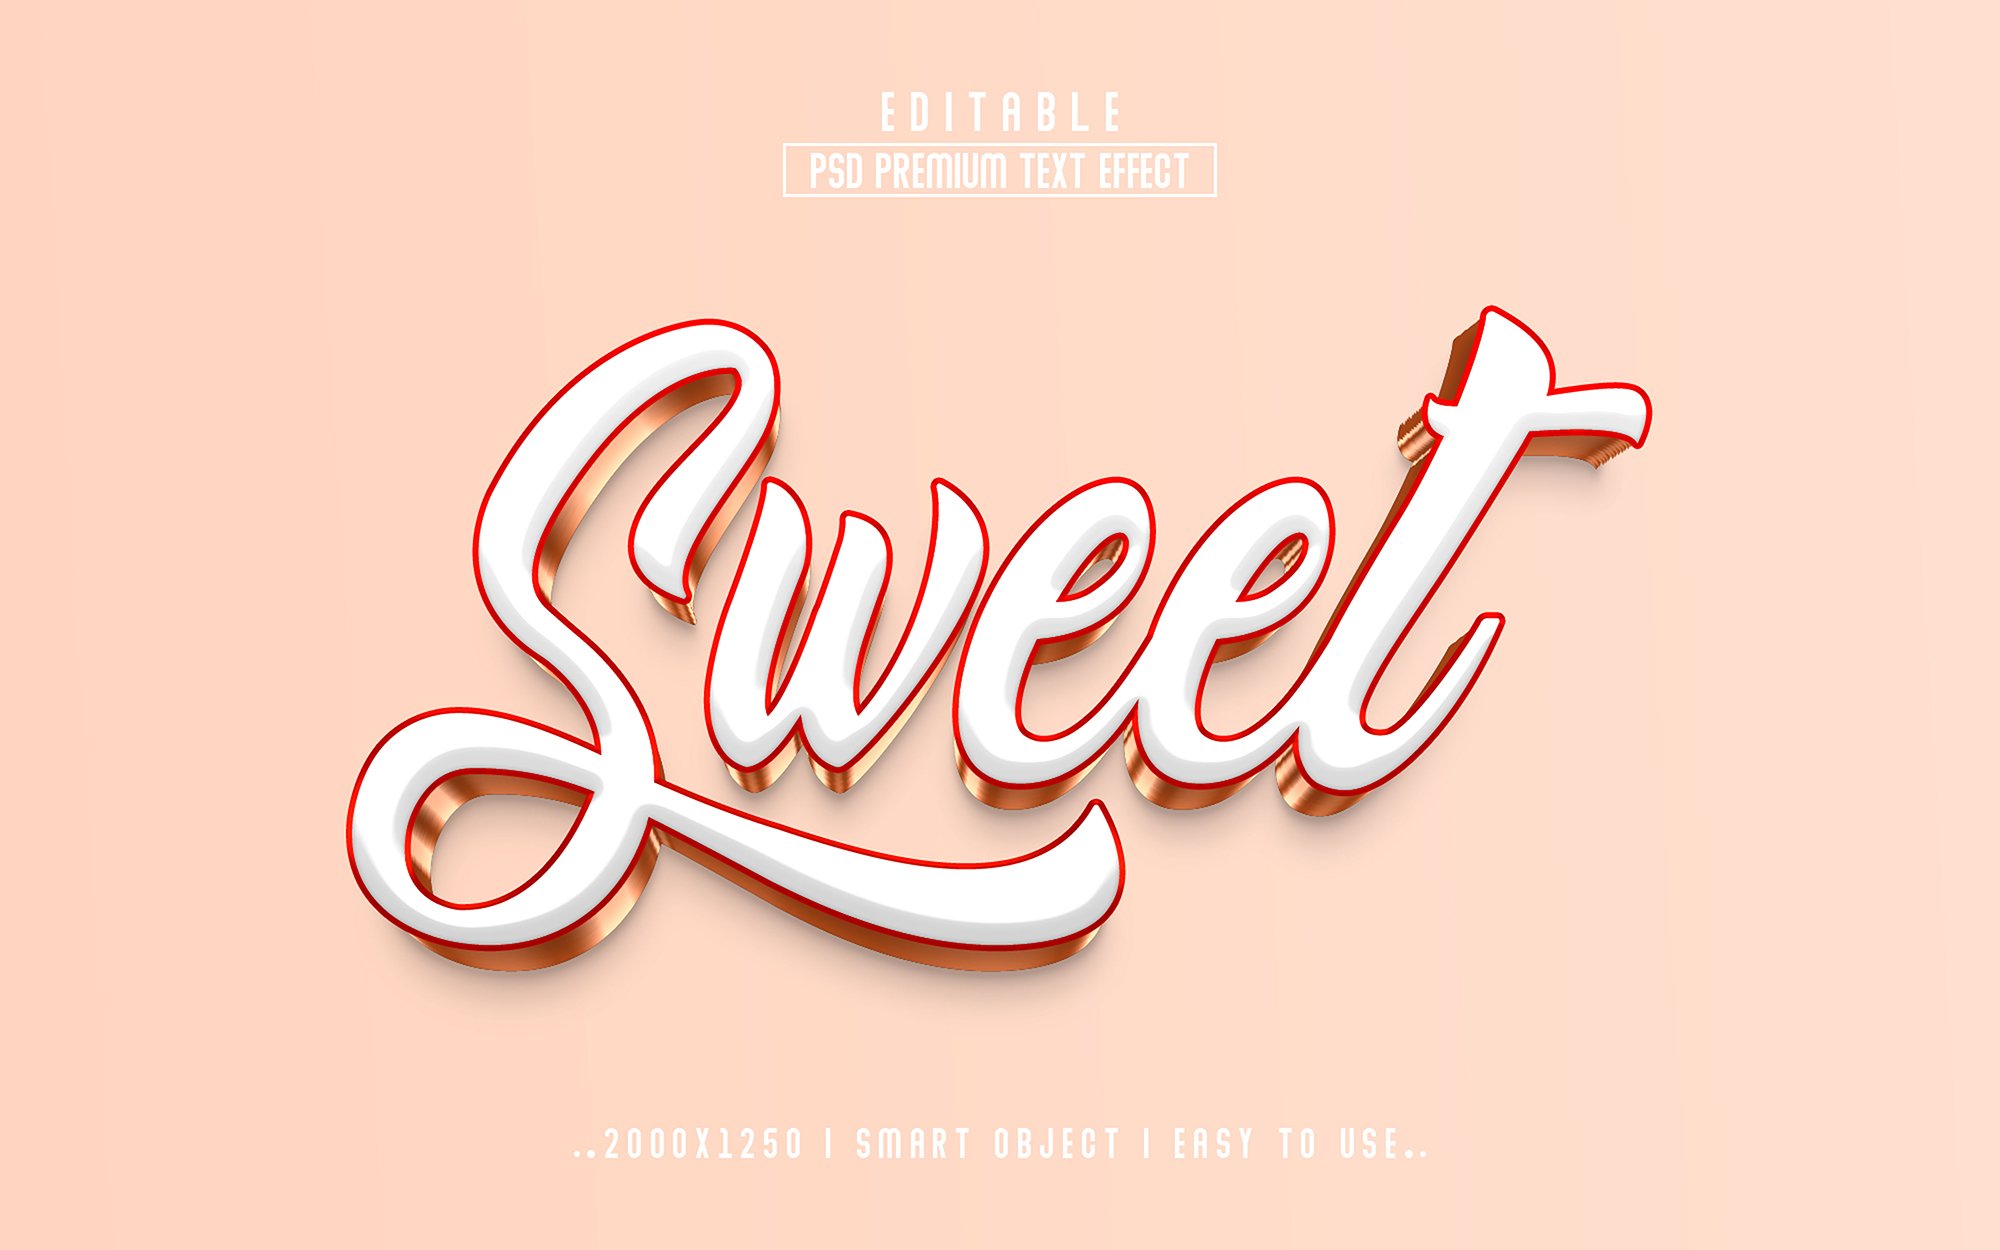 Type of lettering that looks like the word sweet.